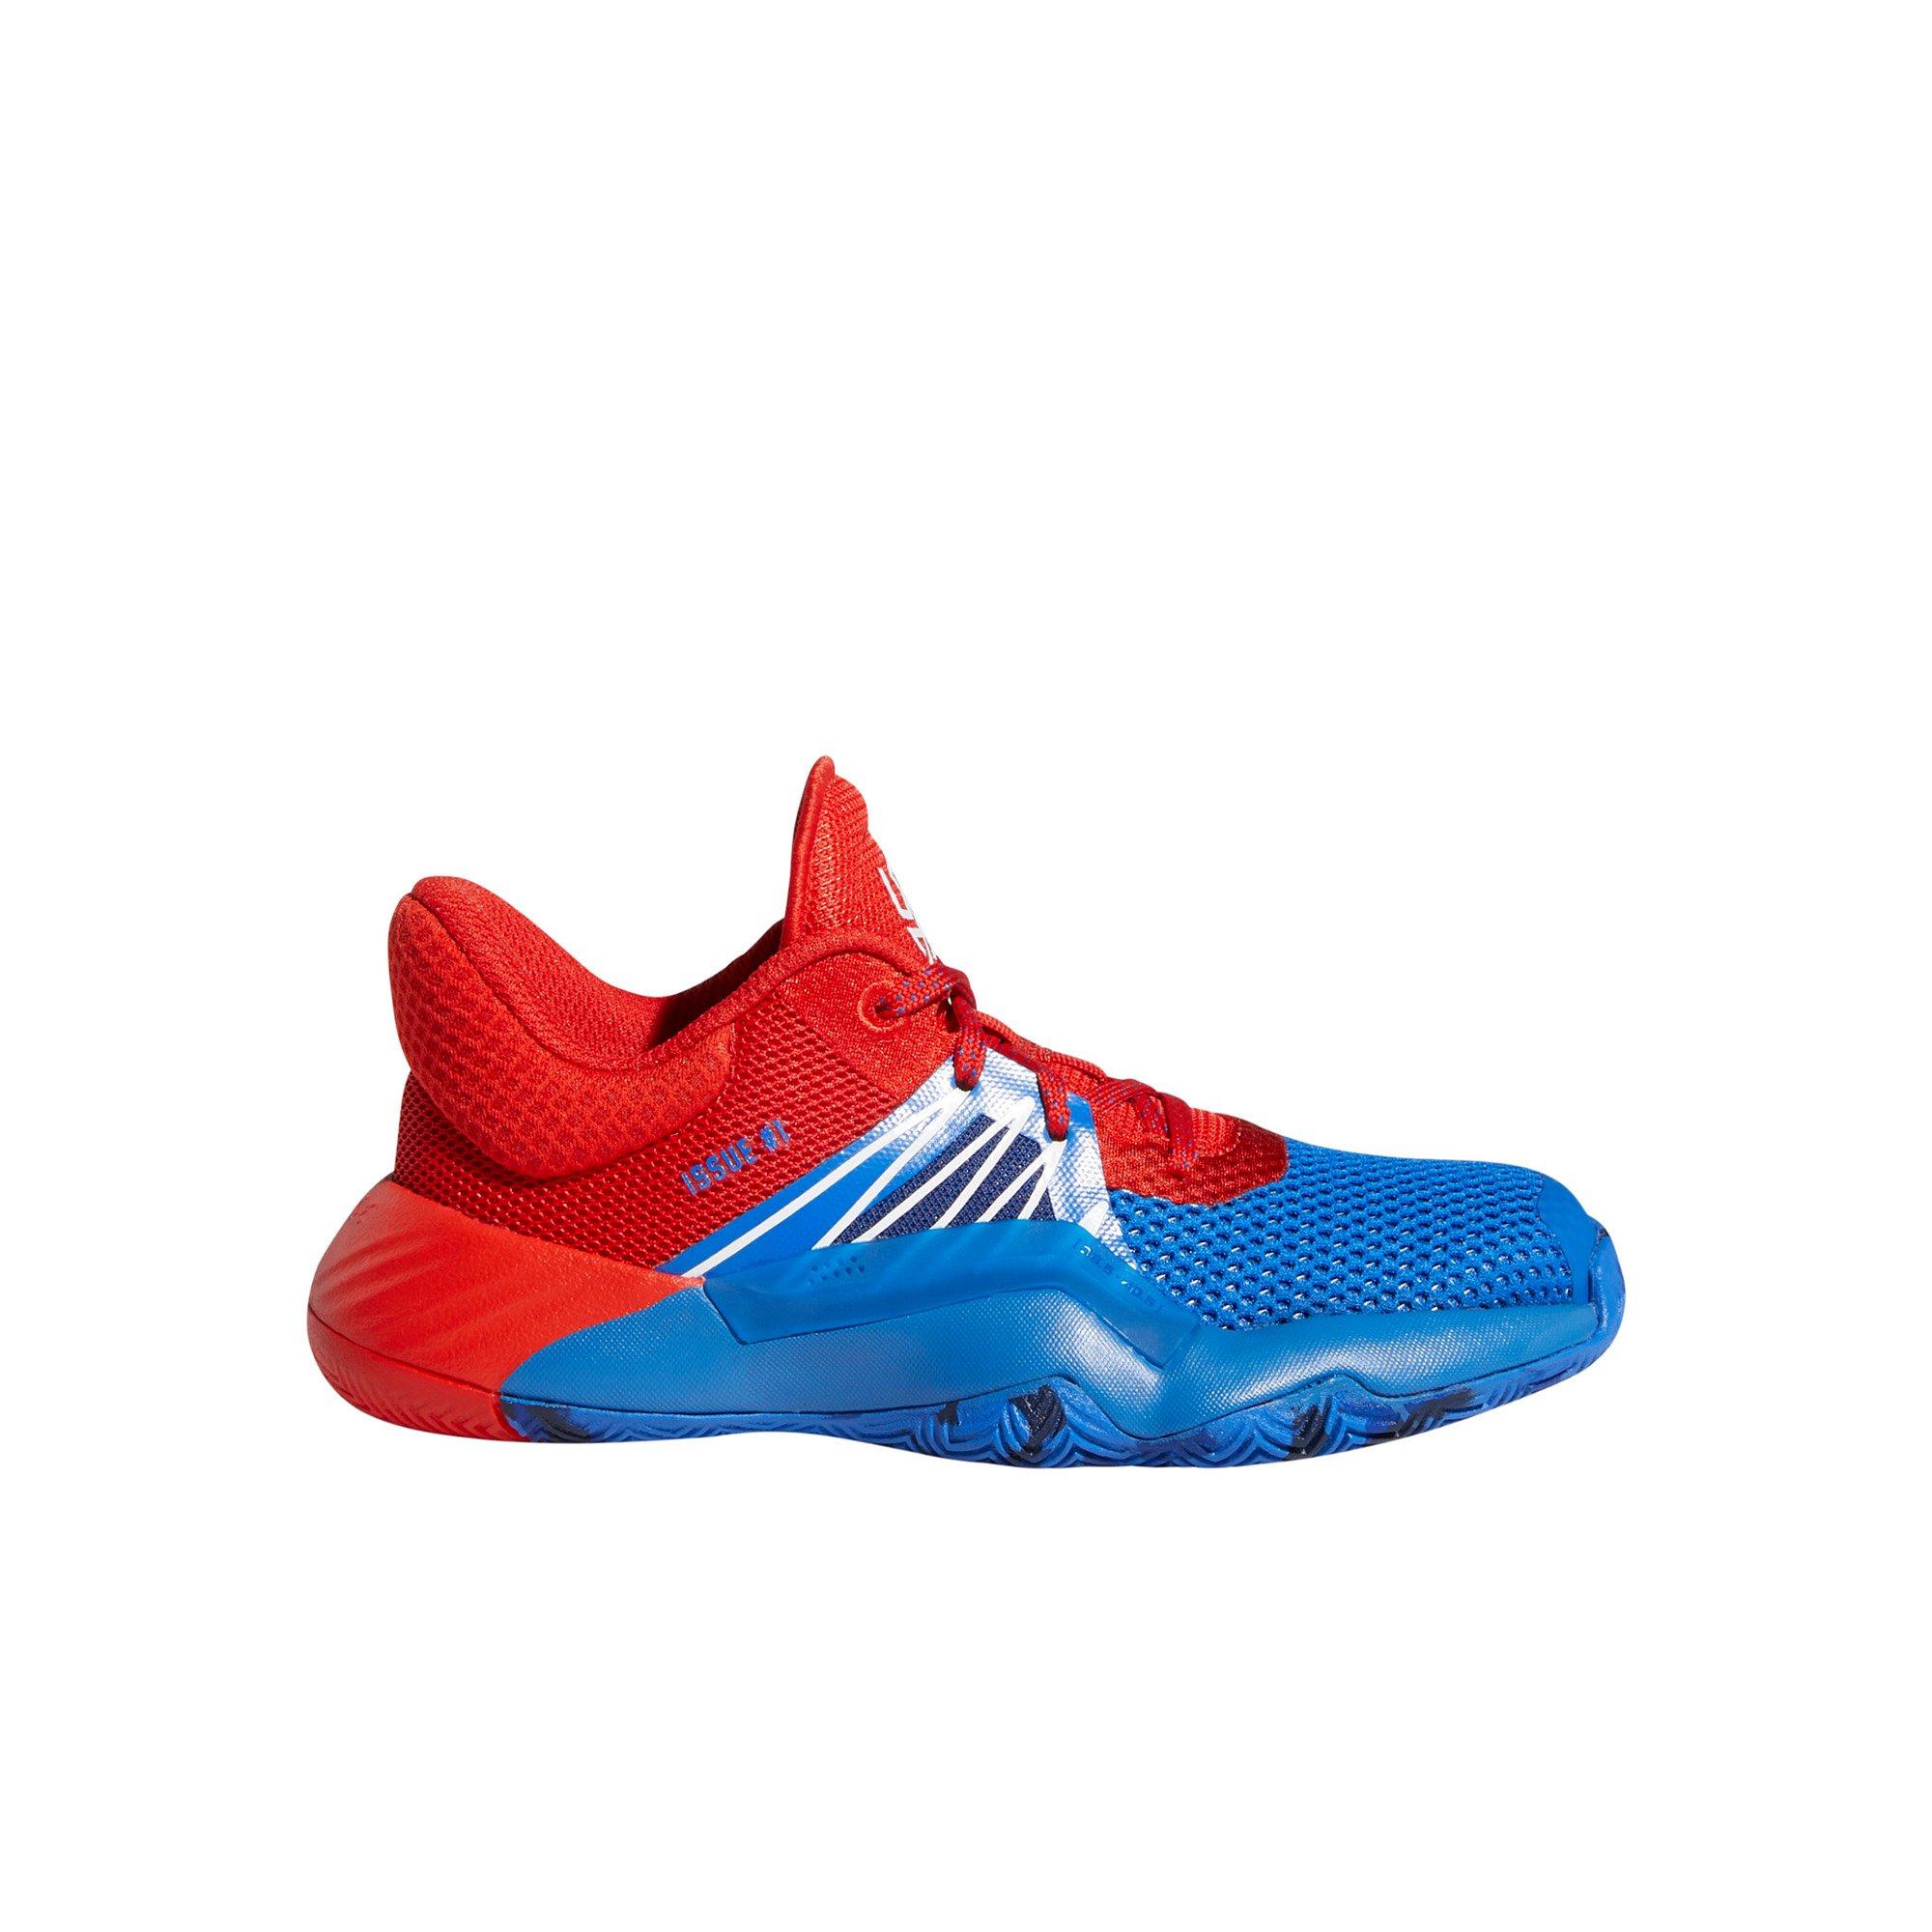 adidas red and blue basketball shoes